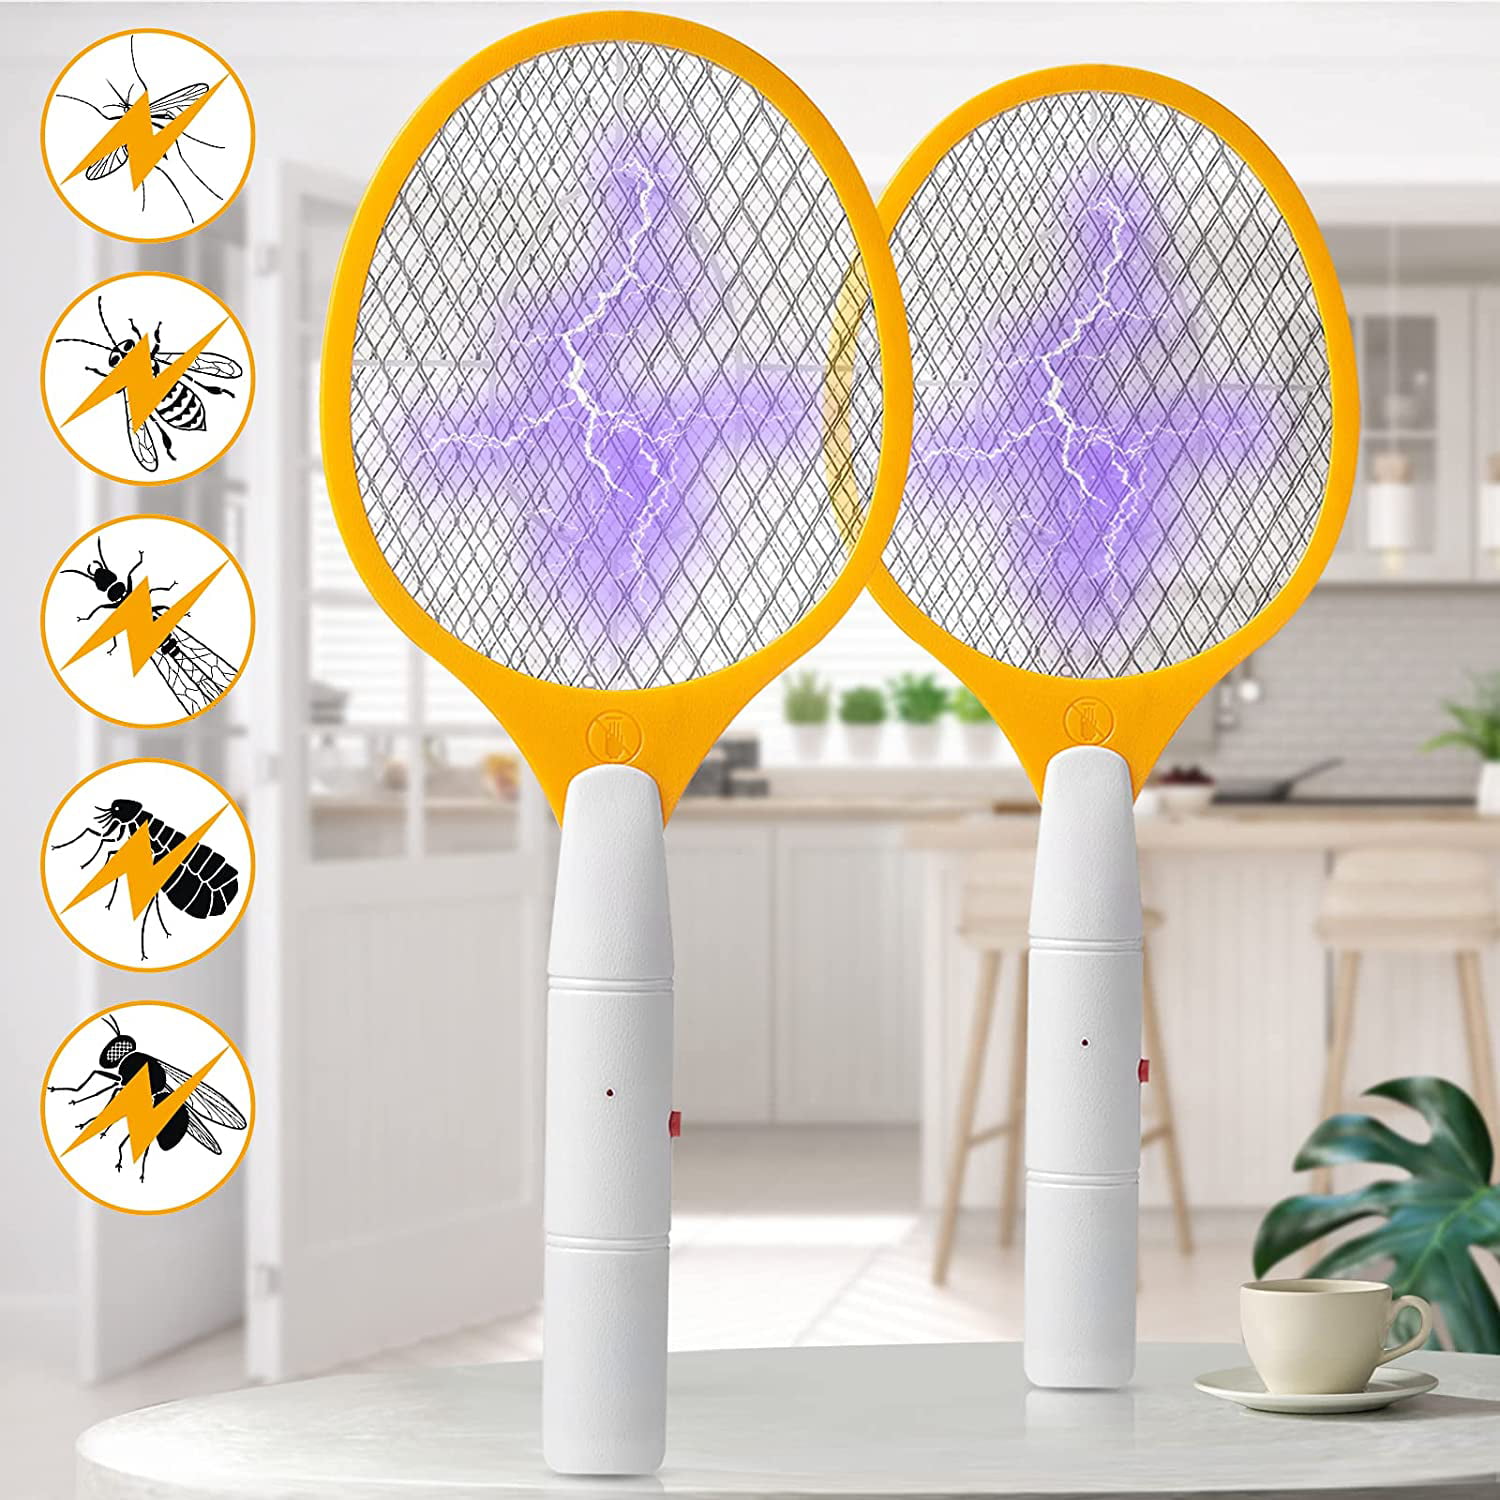 BRAND NEW IN PACKAGE ELECTRONIC FLY MOSQUITO SWATTER 